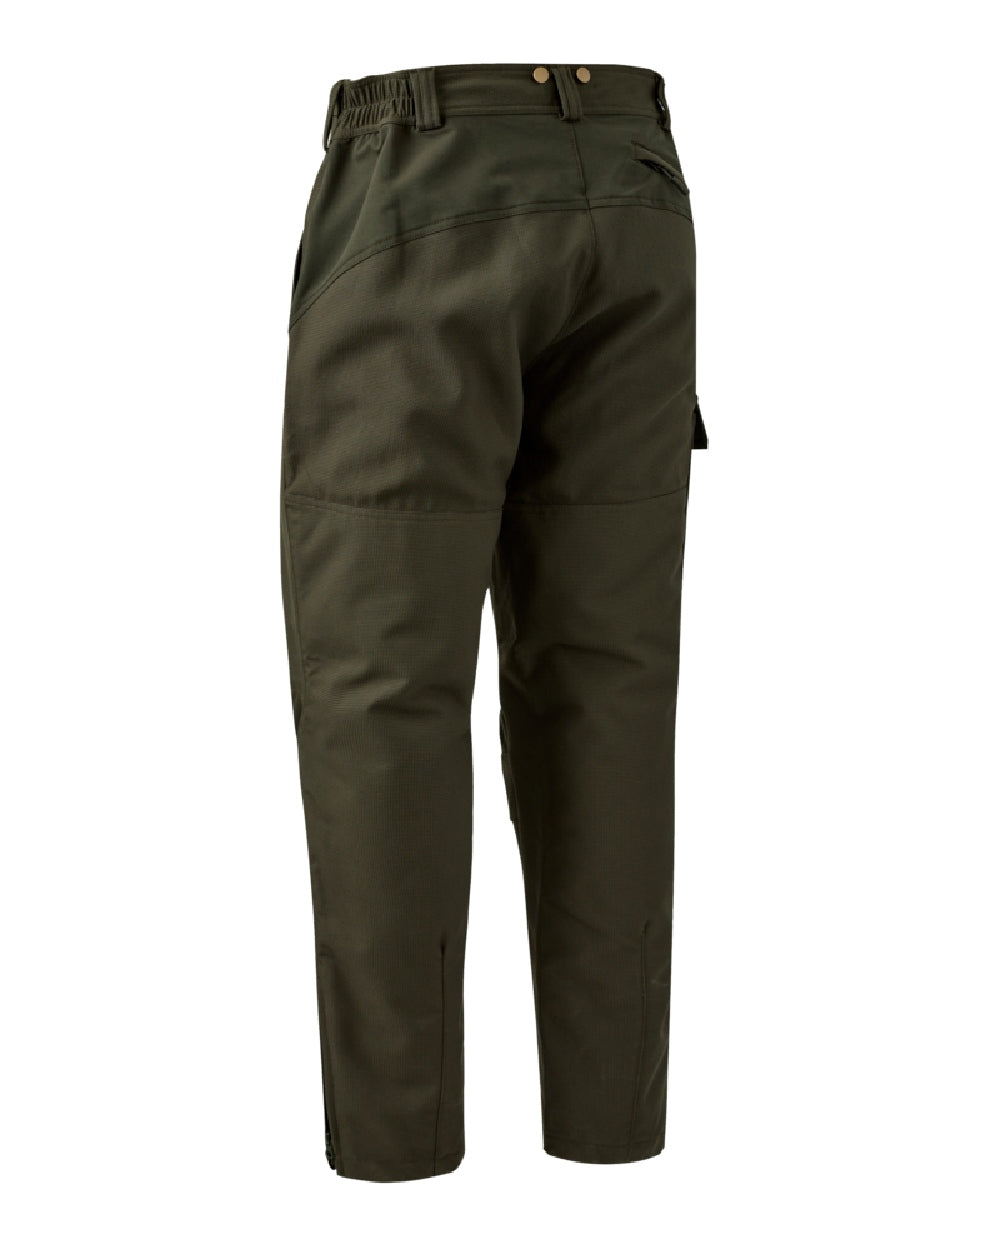 Deerhunter Strike Extreme Boot Trousers in Palm Green